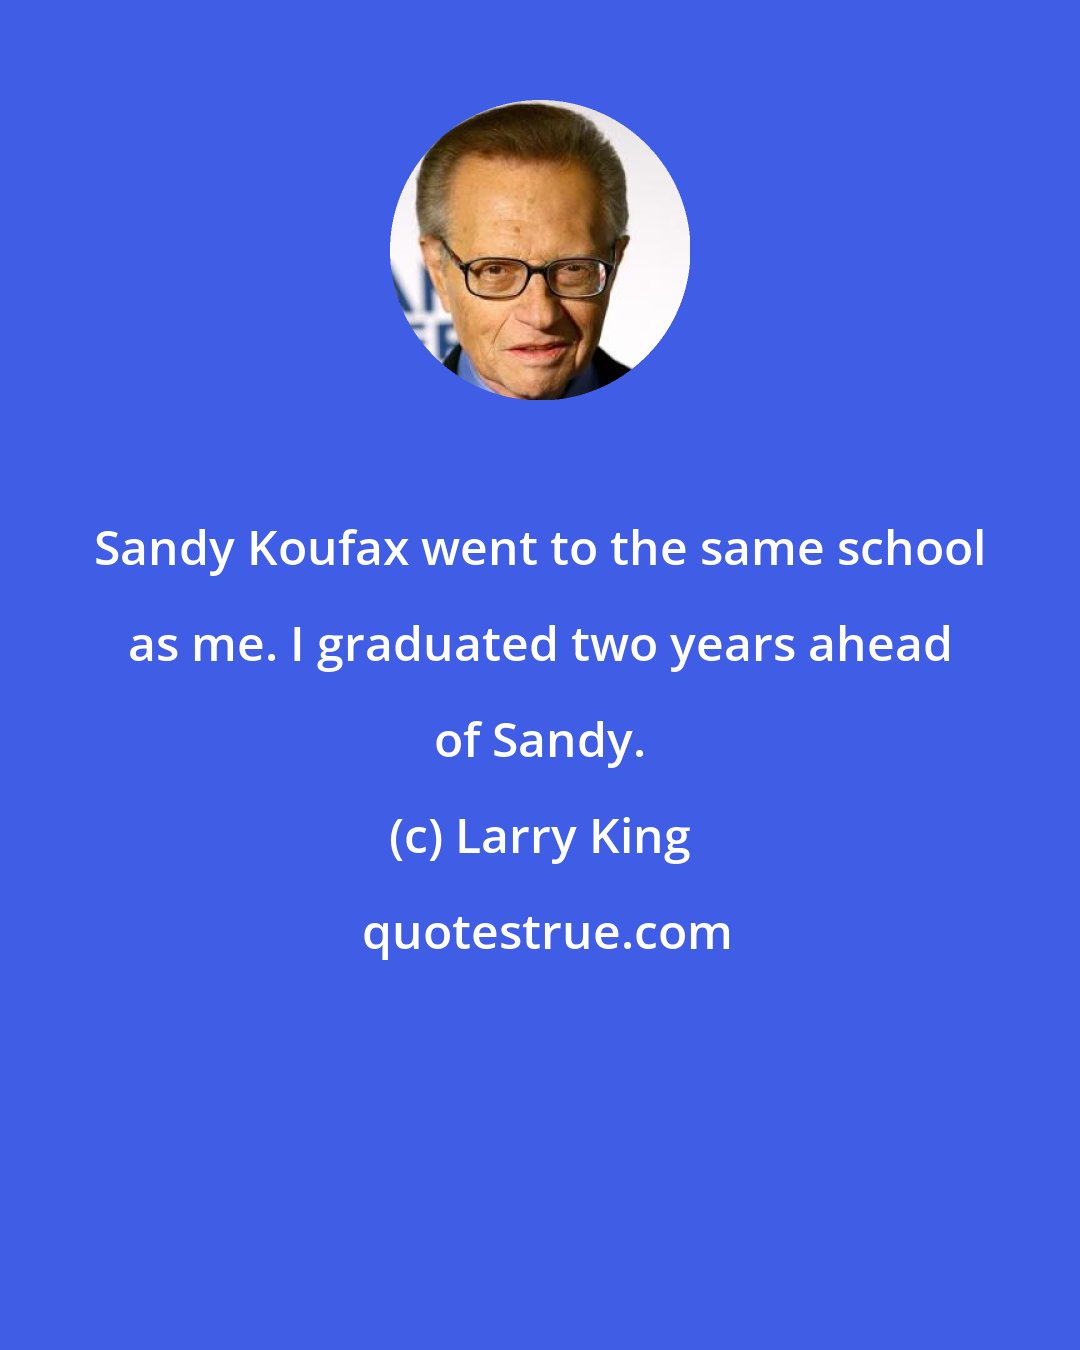 Larry King: Sandy Koufax went to the same school as me. I graduated two years ahead of Sandy.